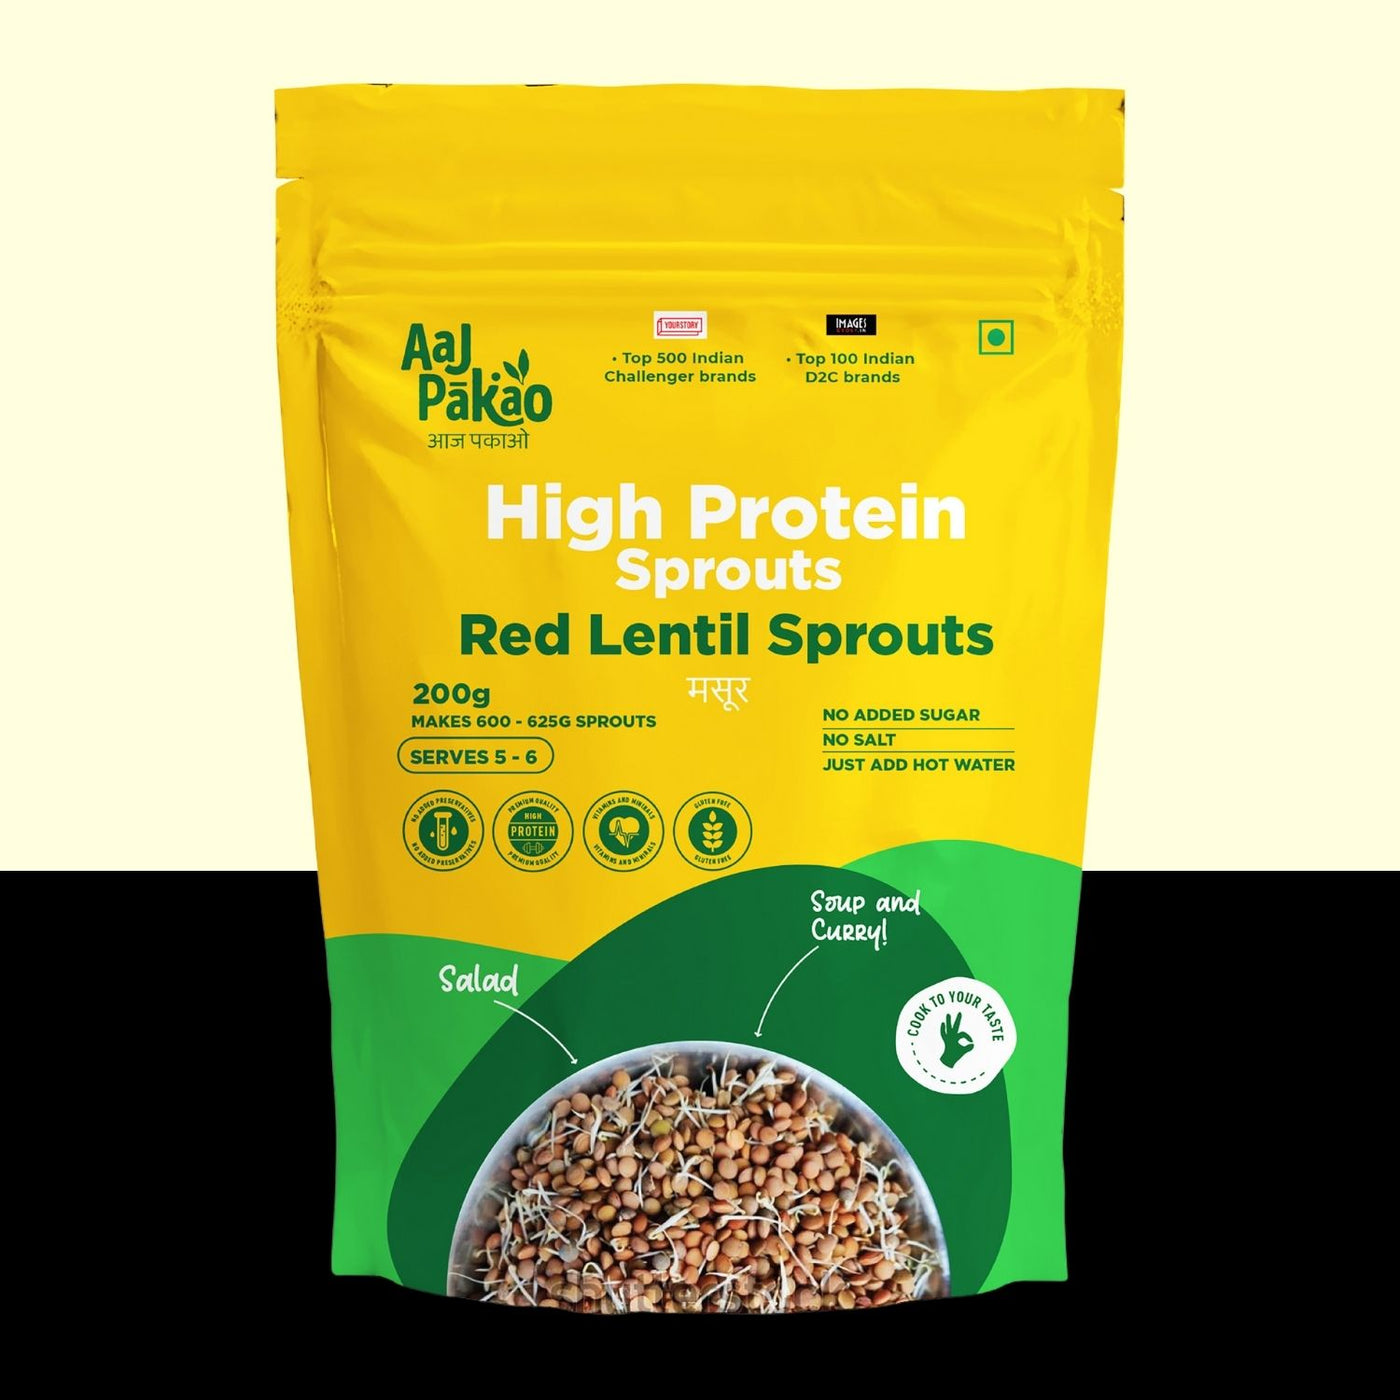 Dehdrated Red Lentil Sprouts, pack of 3, 600. grams